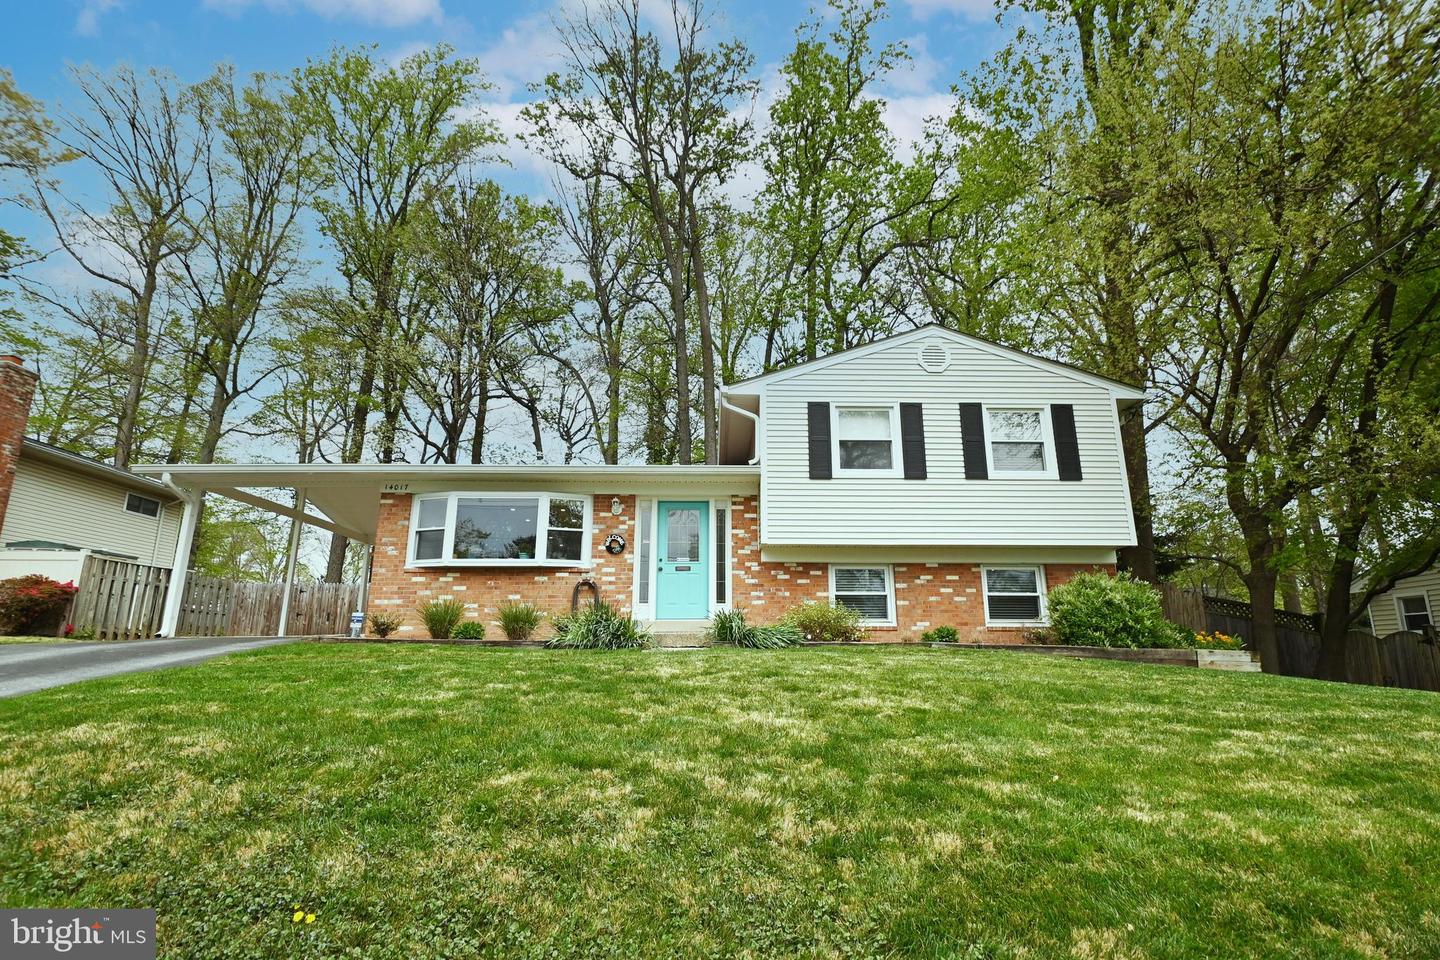 View Rockville, MD 20853 house